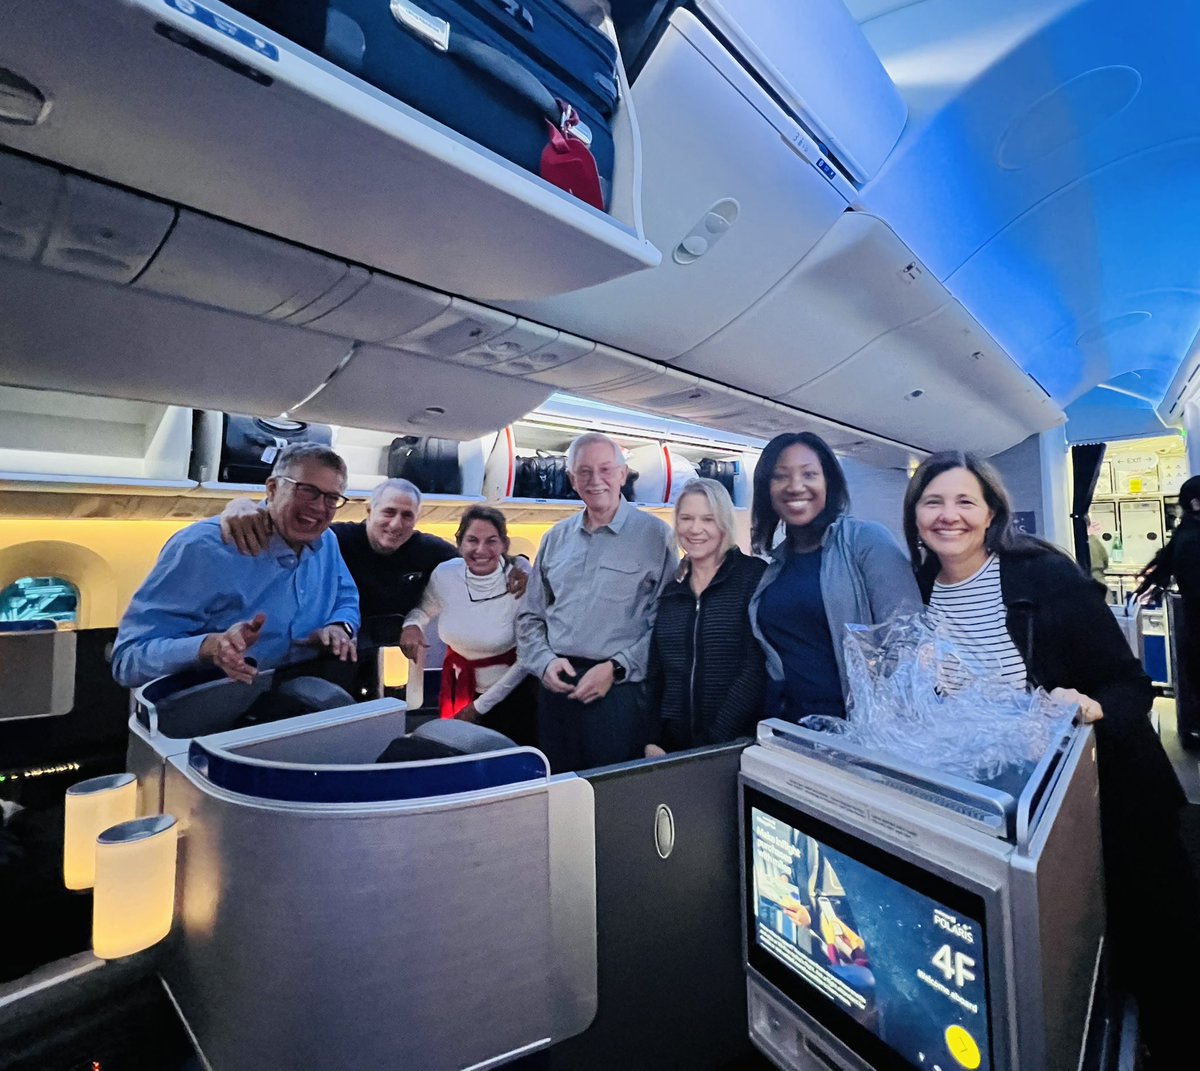 Hi @ChongPan_HMS Here you go: in the plane with my wife Diane on the way to WCLC with @DrRoyHerbstYale @HwakeleeMD @marinagarassino @JhanelleGray plus some unknown guy who jumped into the photo! @IASLC